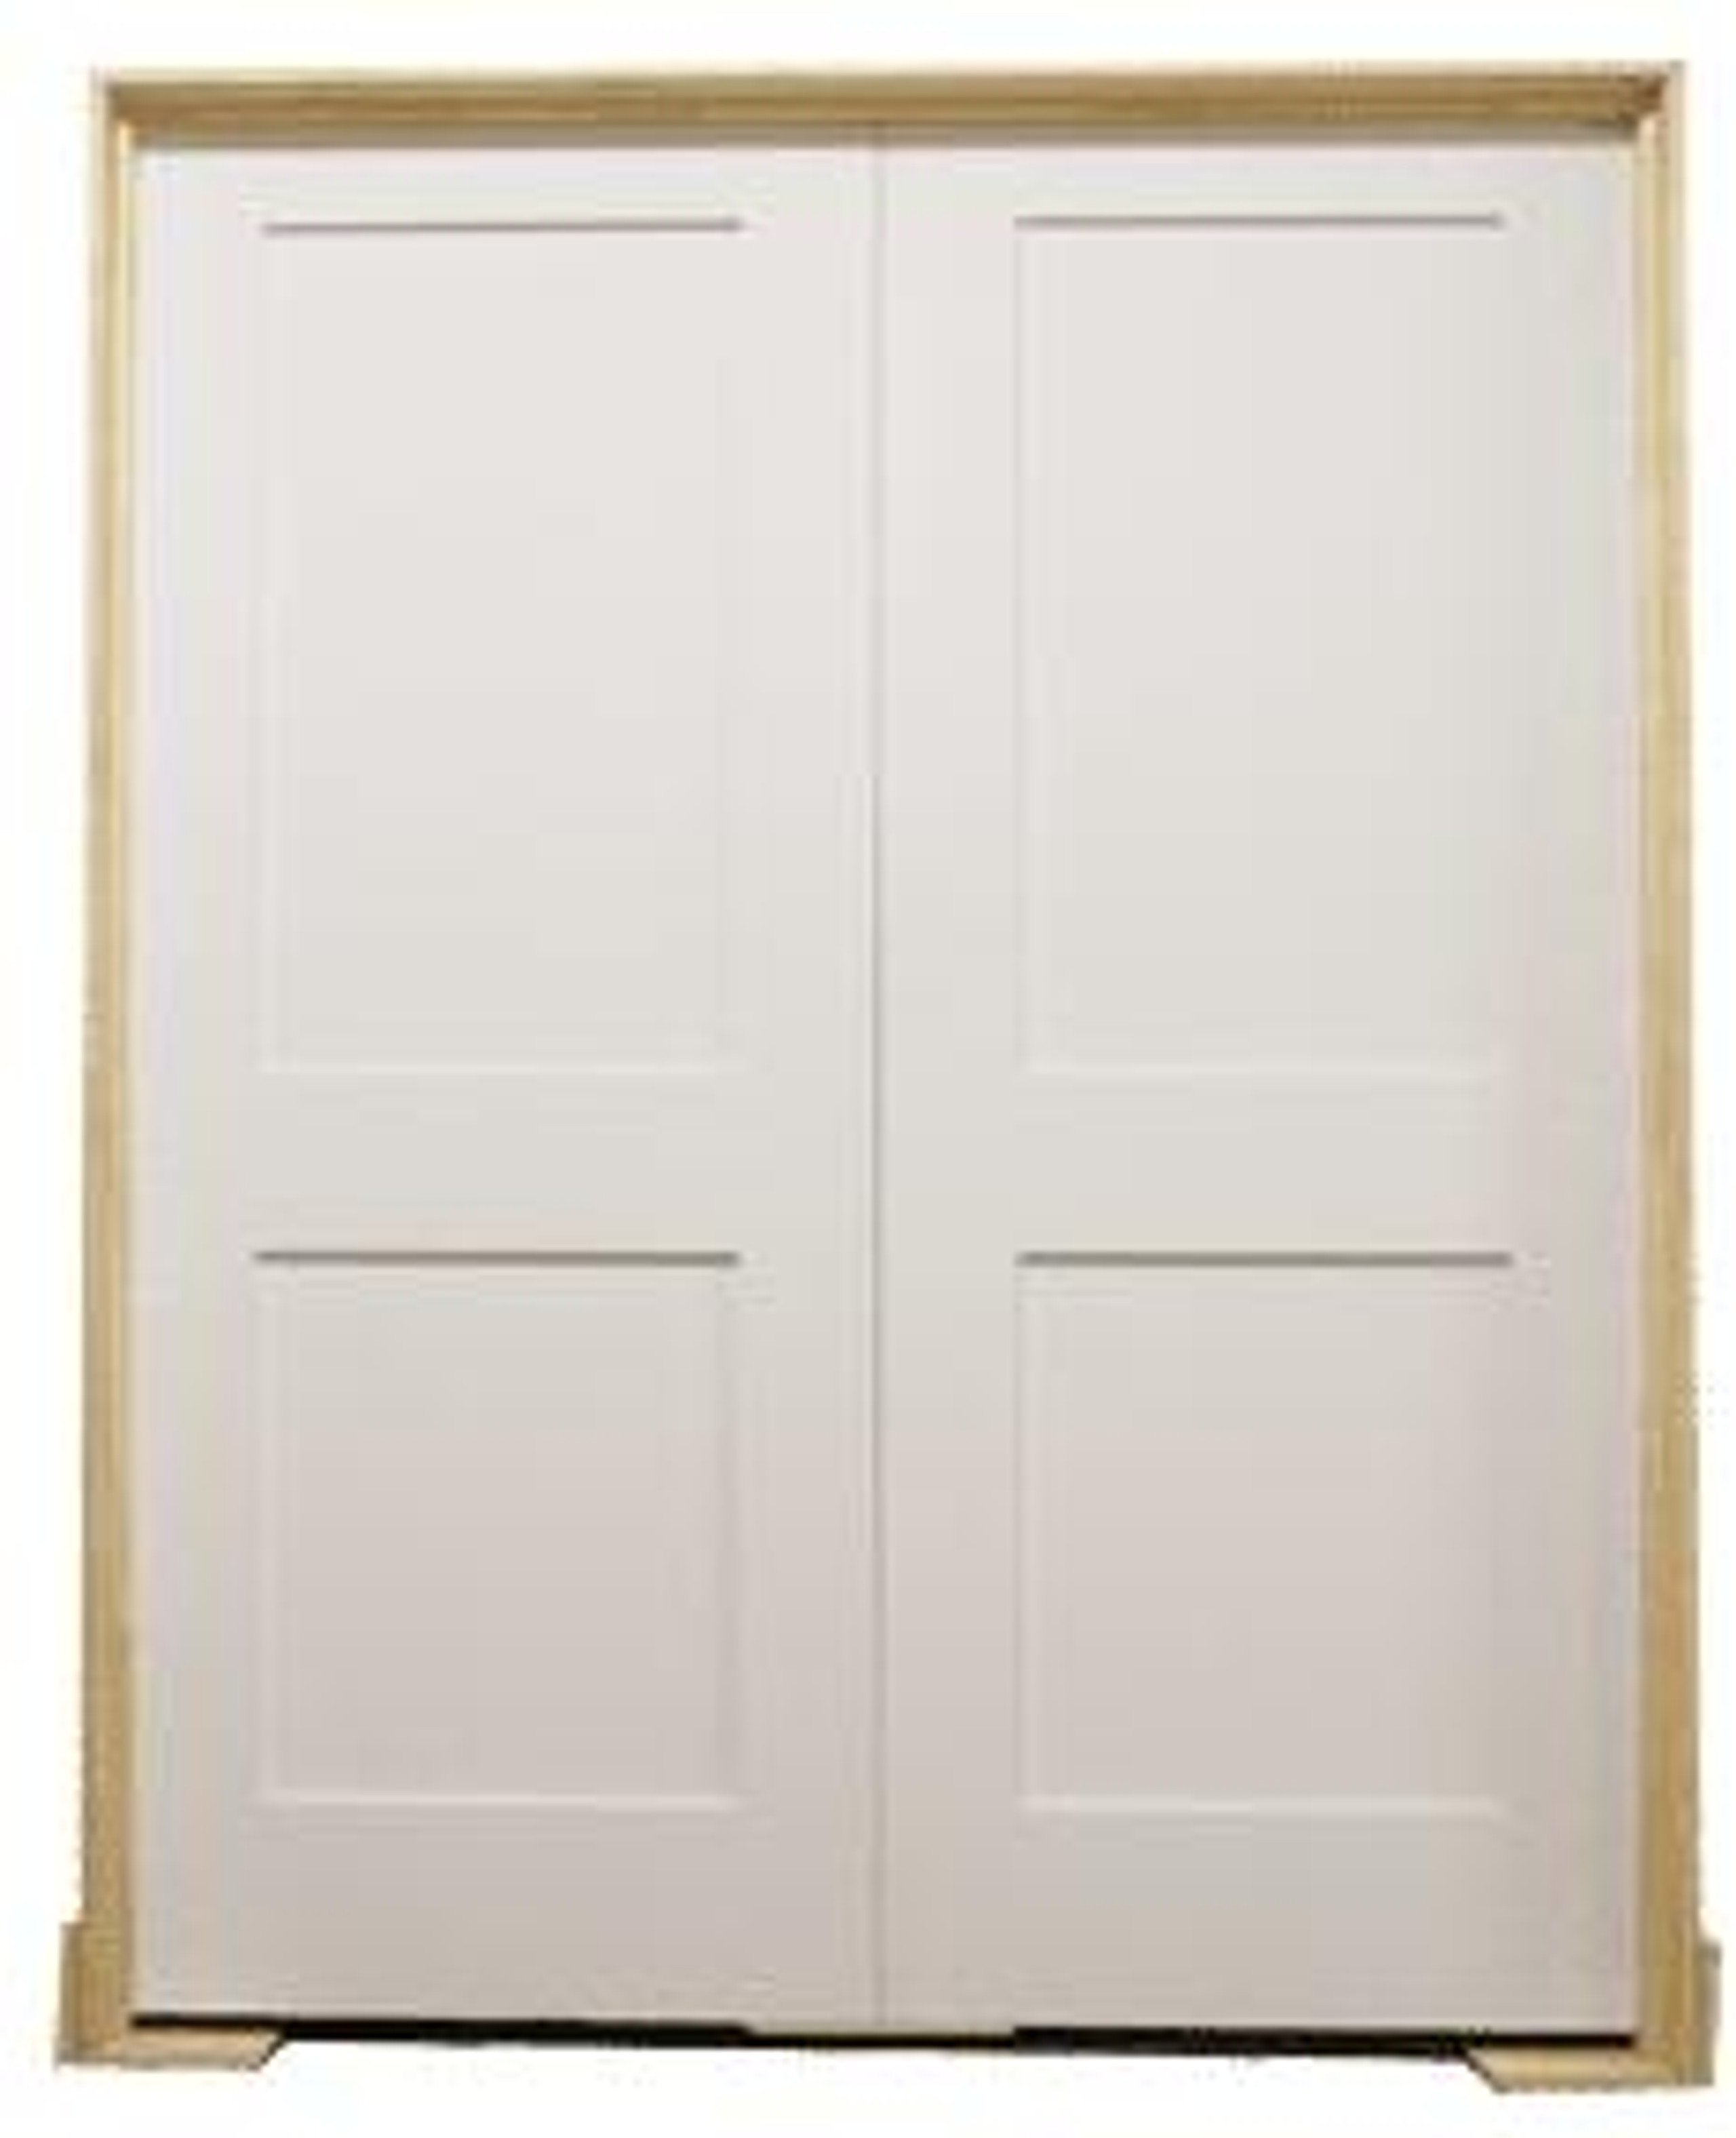 60 in X 80 in White Shaker 2 Panel Solid Core Primed MDF Prehung Interior French Door